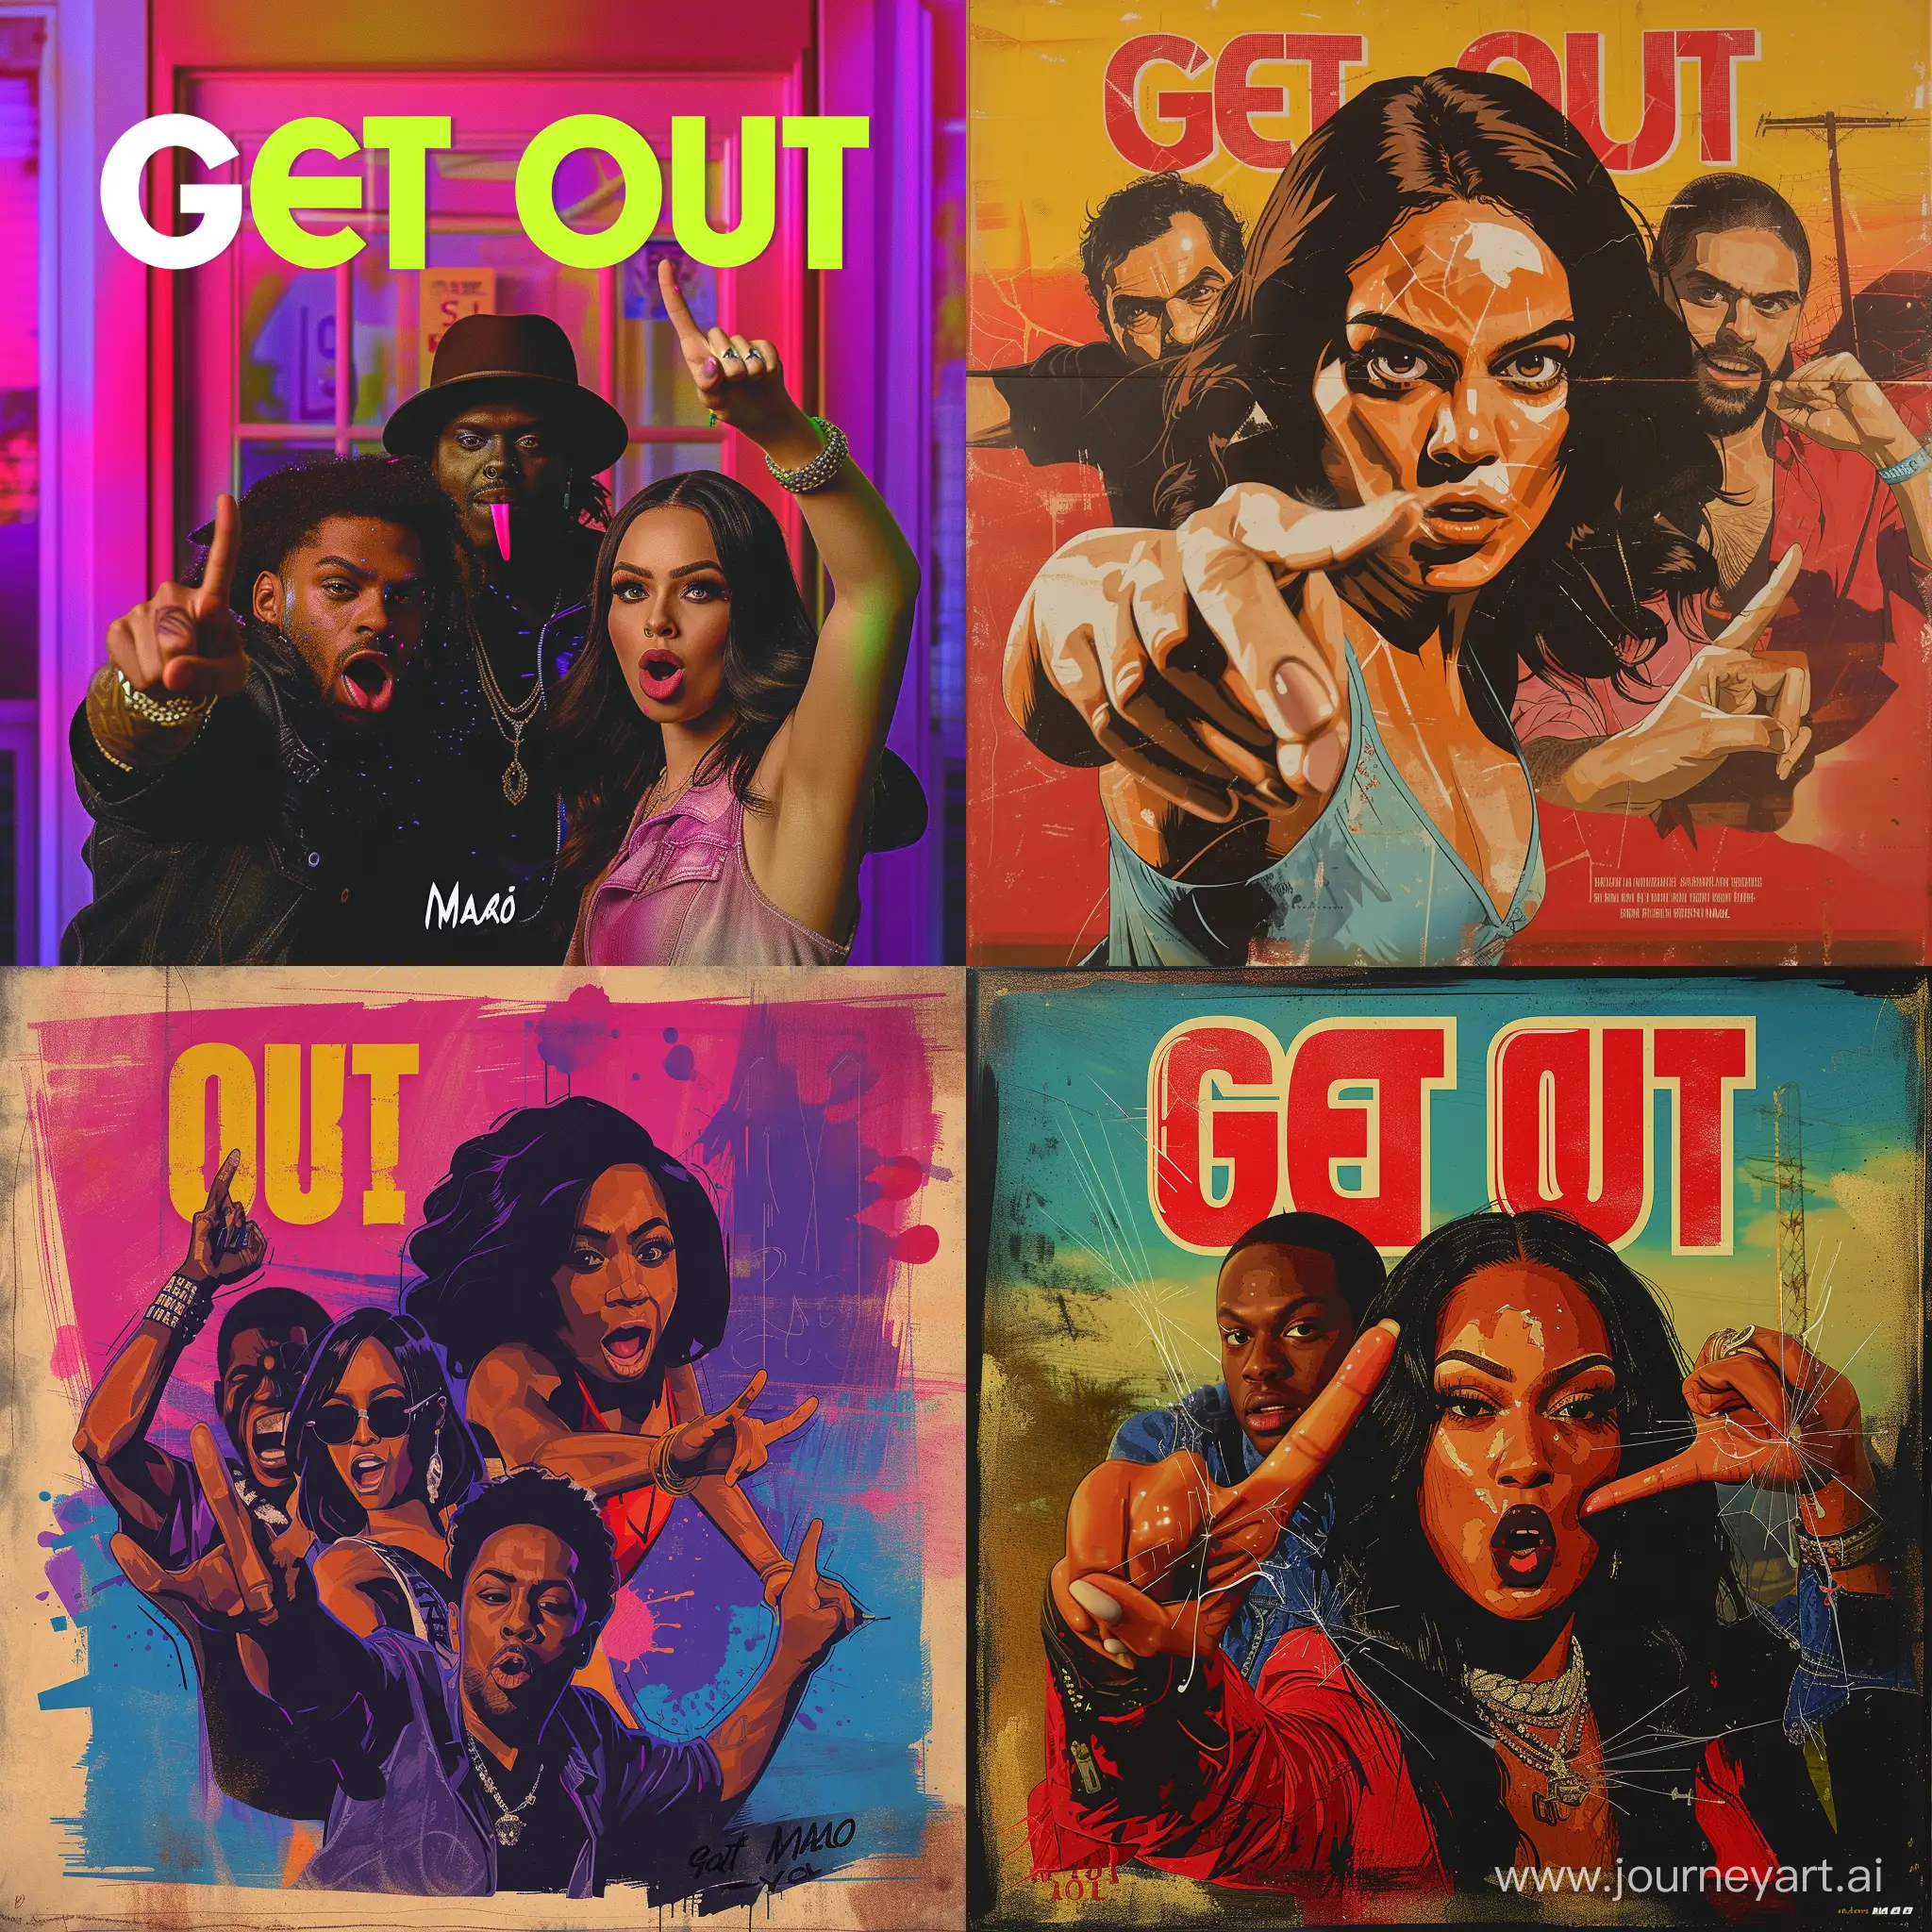 Album Cover for the Song "Get Out" from the Artists Sura, Heinrich, MALO with a woman flipping us off